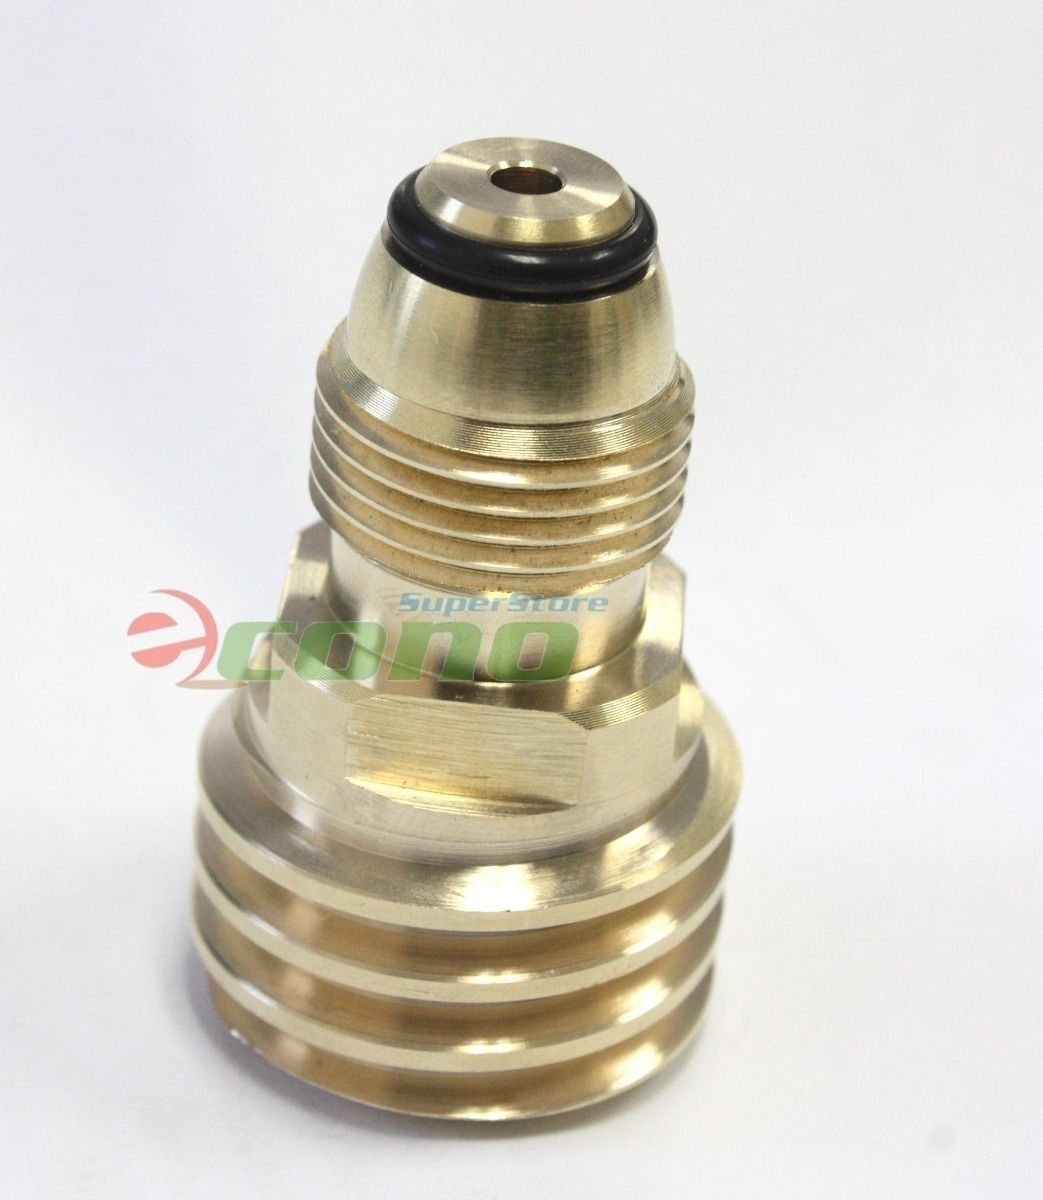 Converts Propane LP TANK POL Service Valve to QCC Outlet Brass Refill HOT E6Y4 